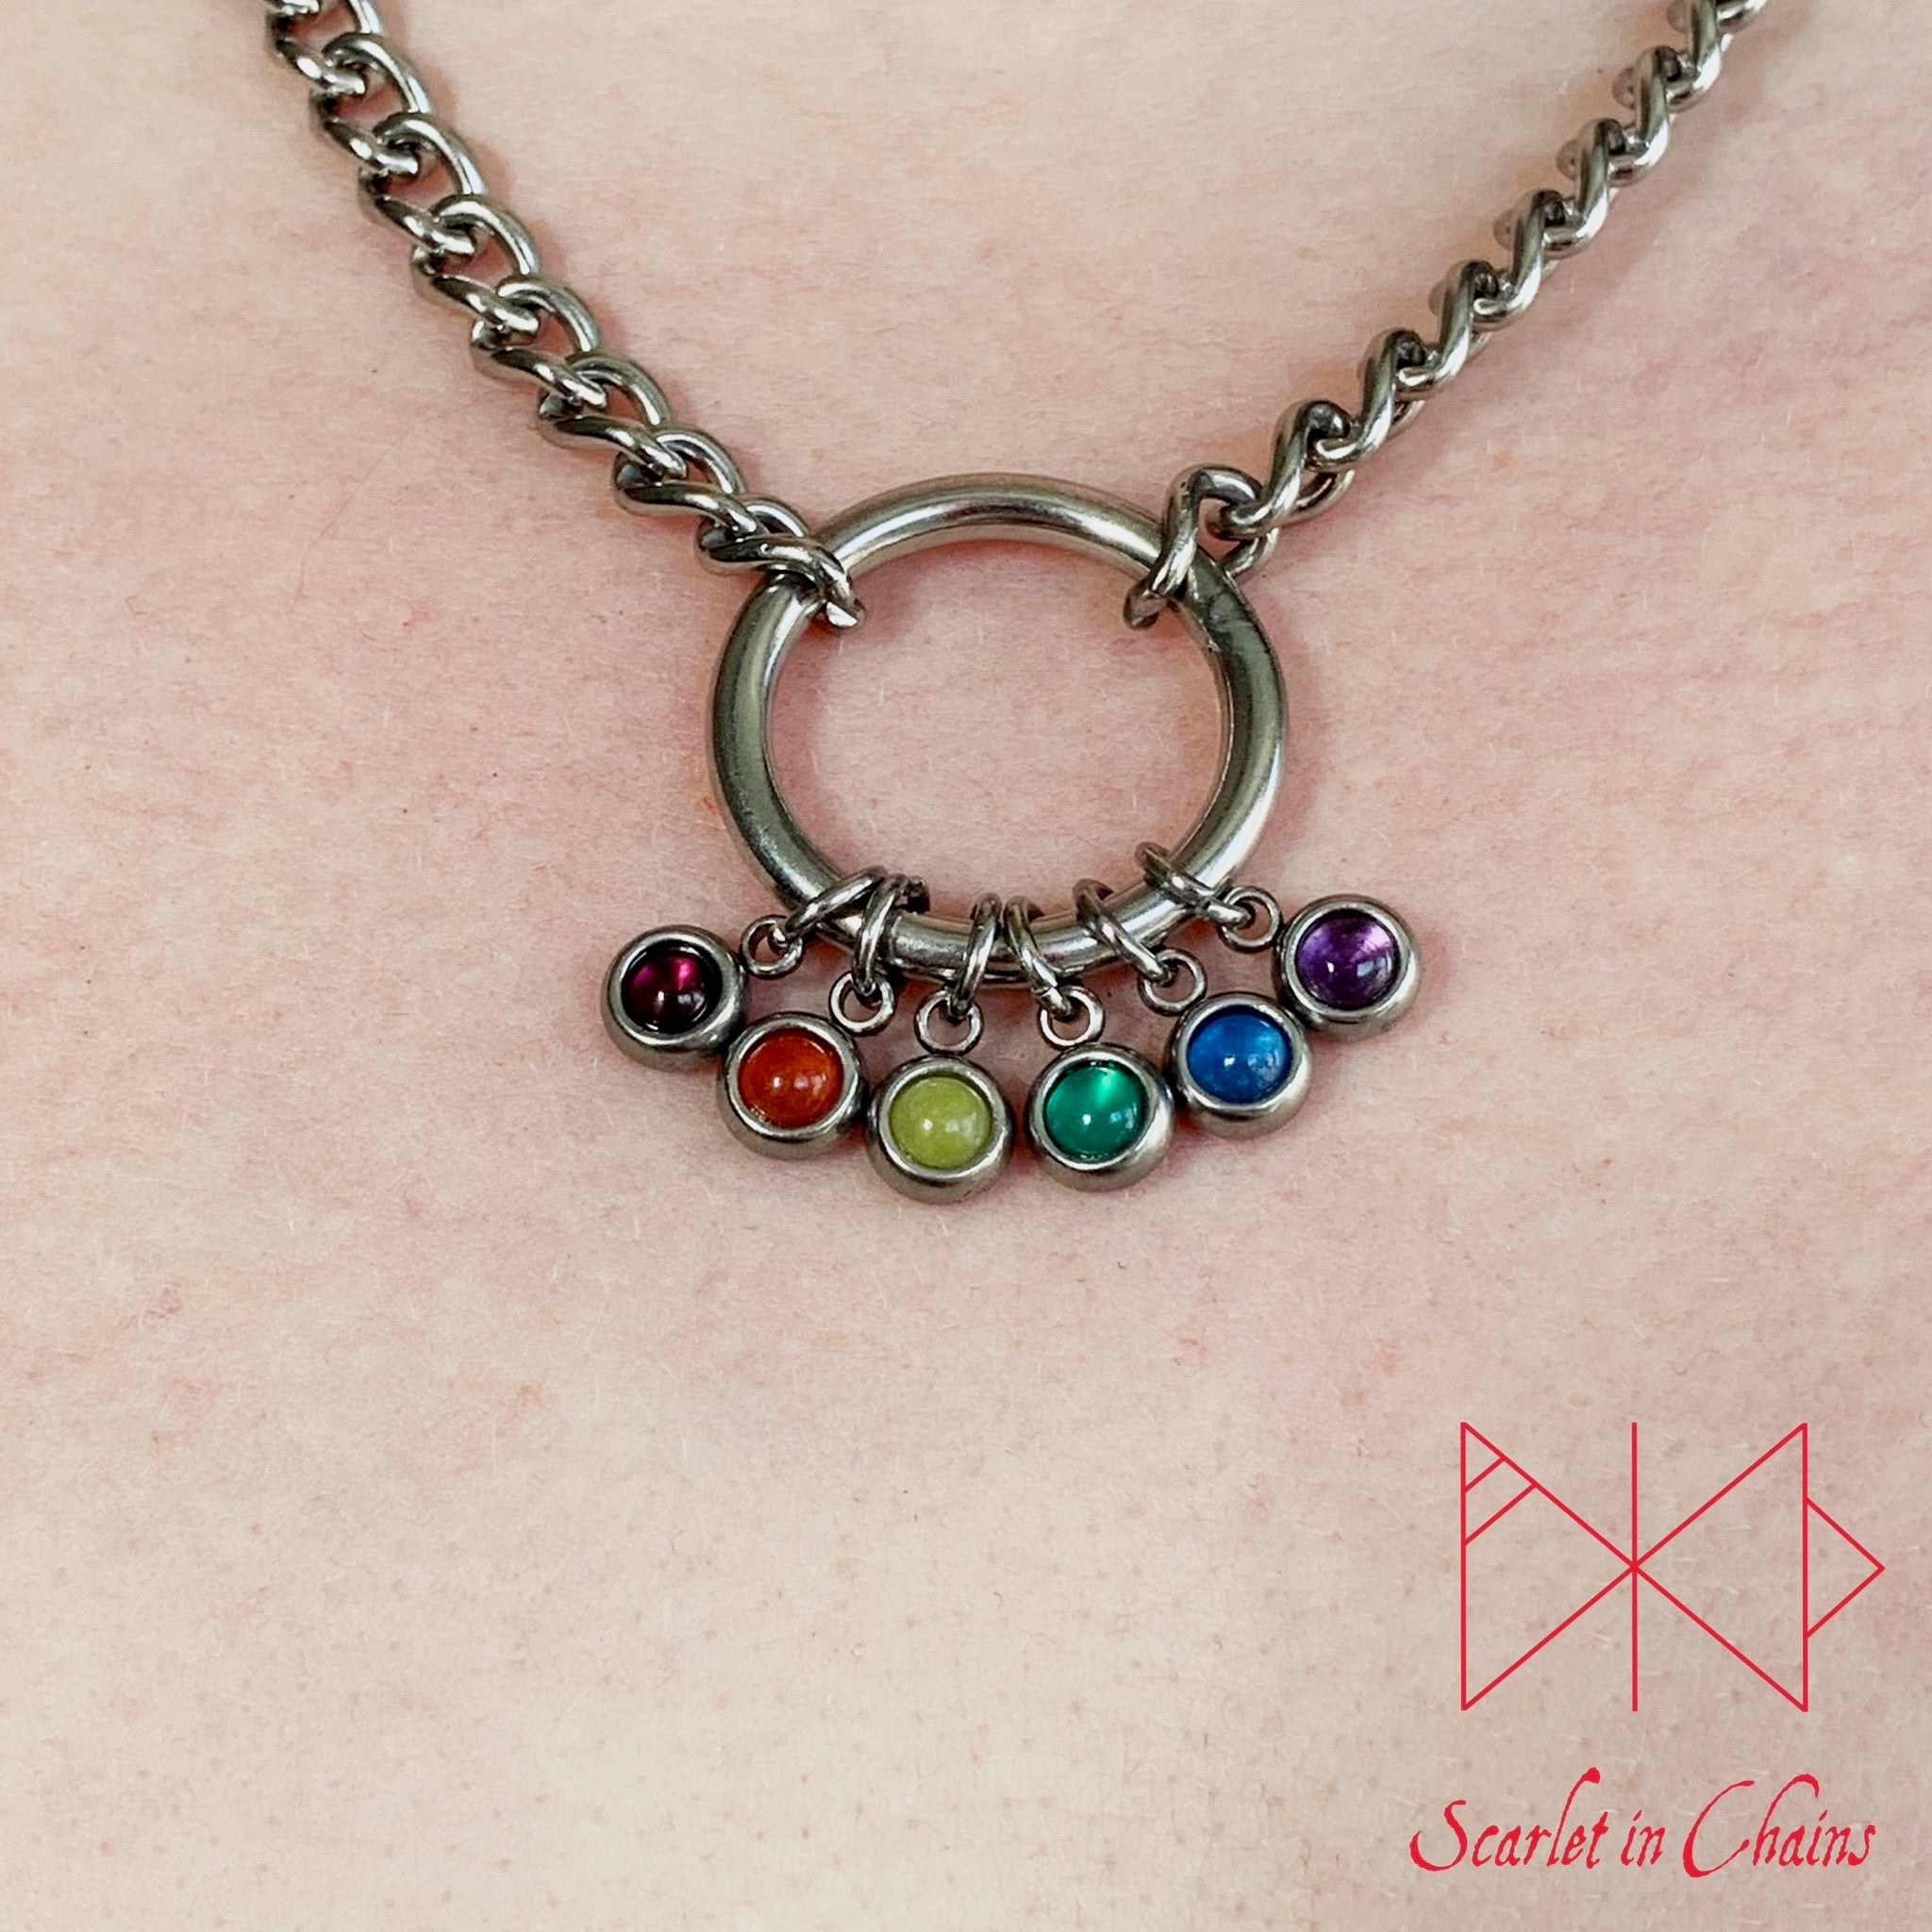 Pride Stainless steel O ring day collar - LGBTQ+ - Trans Pride jewellery - Bisexual necklace - Asexual jewellery - Pride - Non Binary Shown Close Rainbow Pride